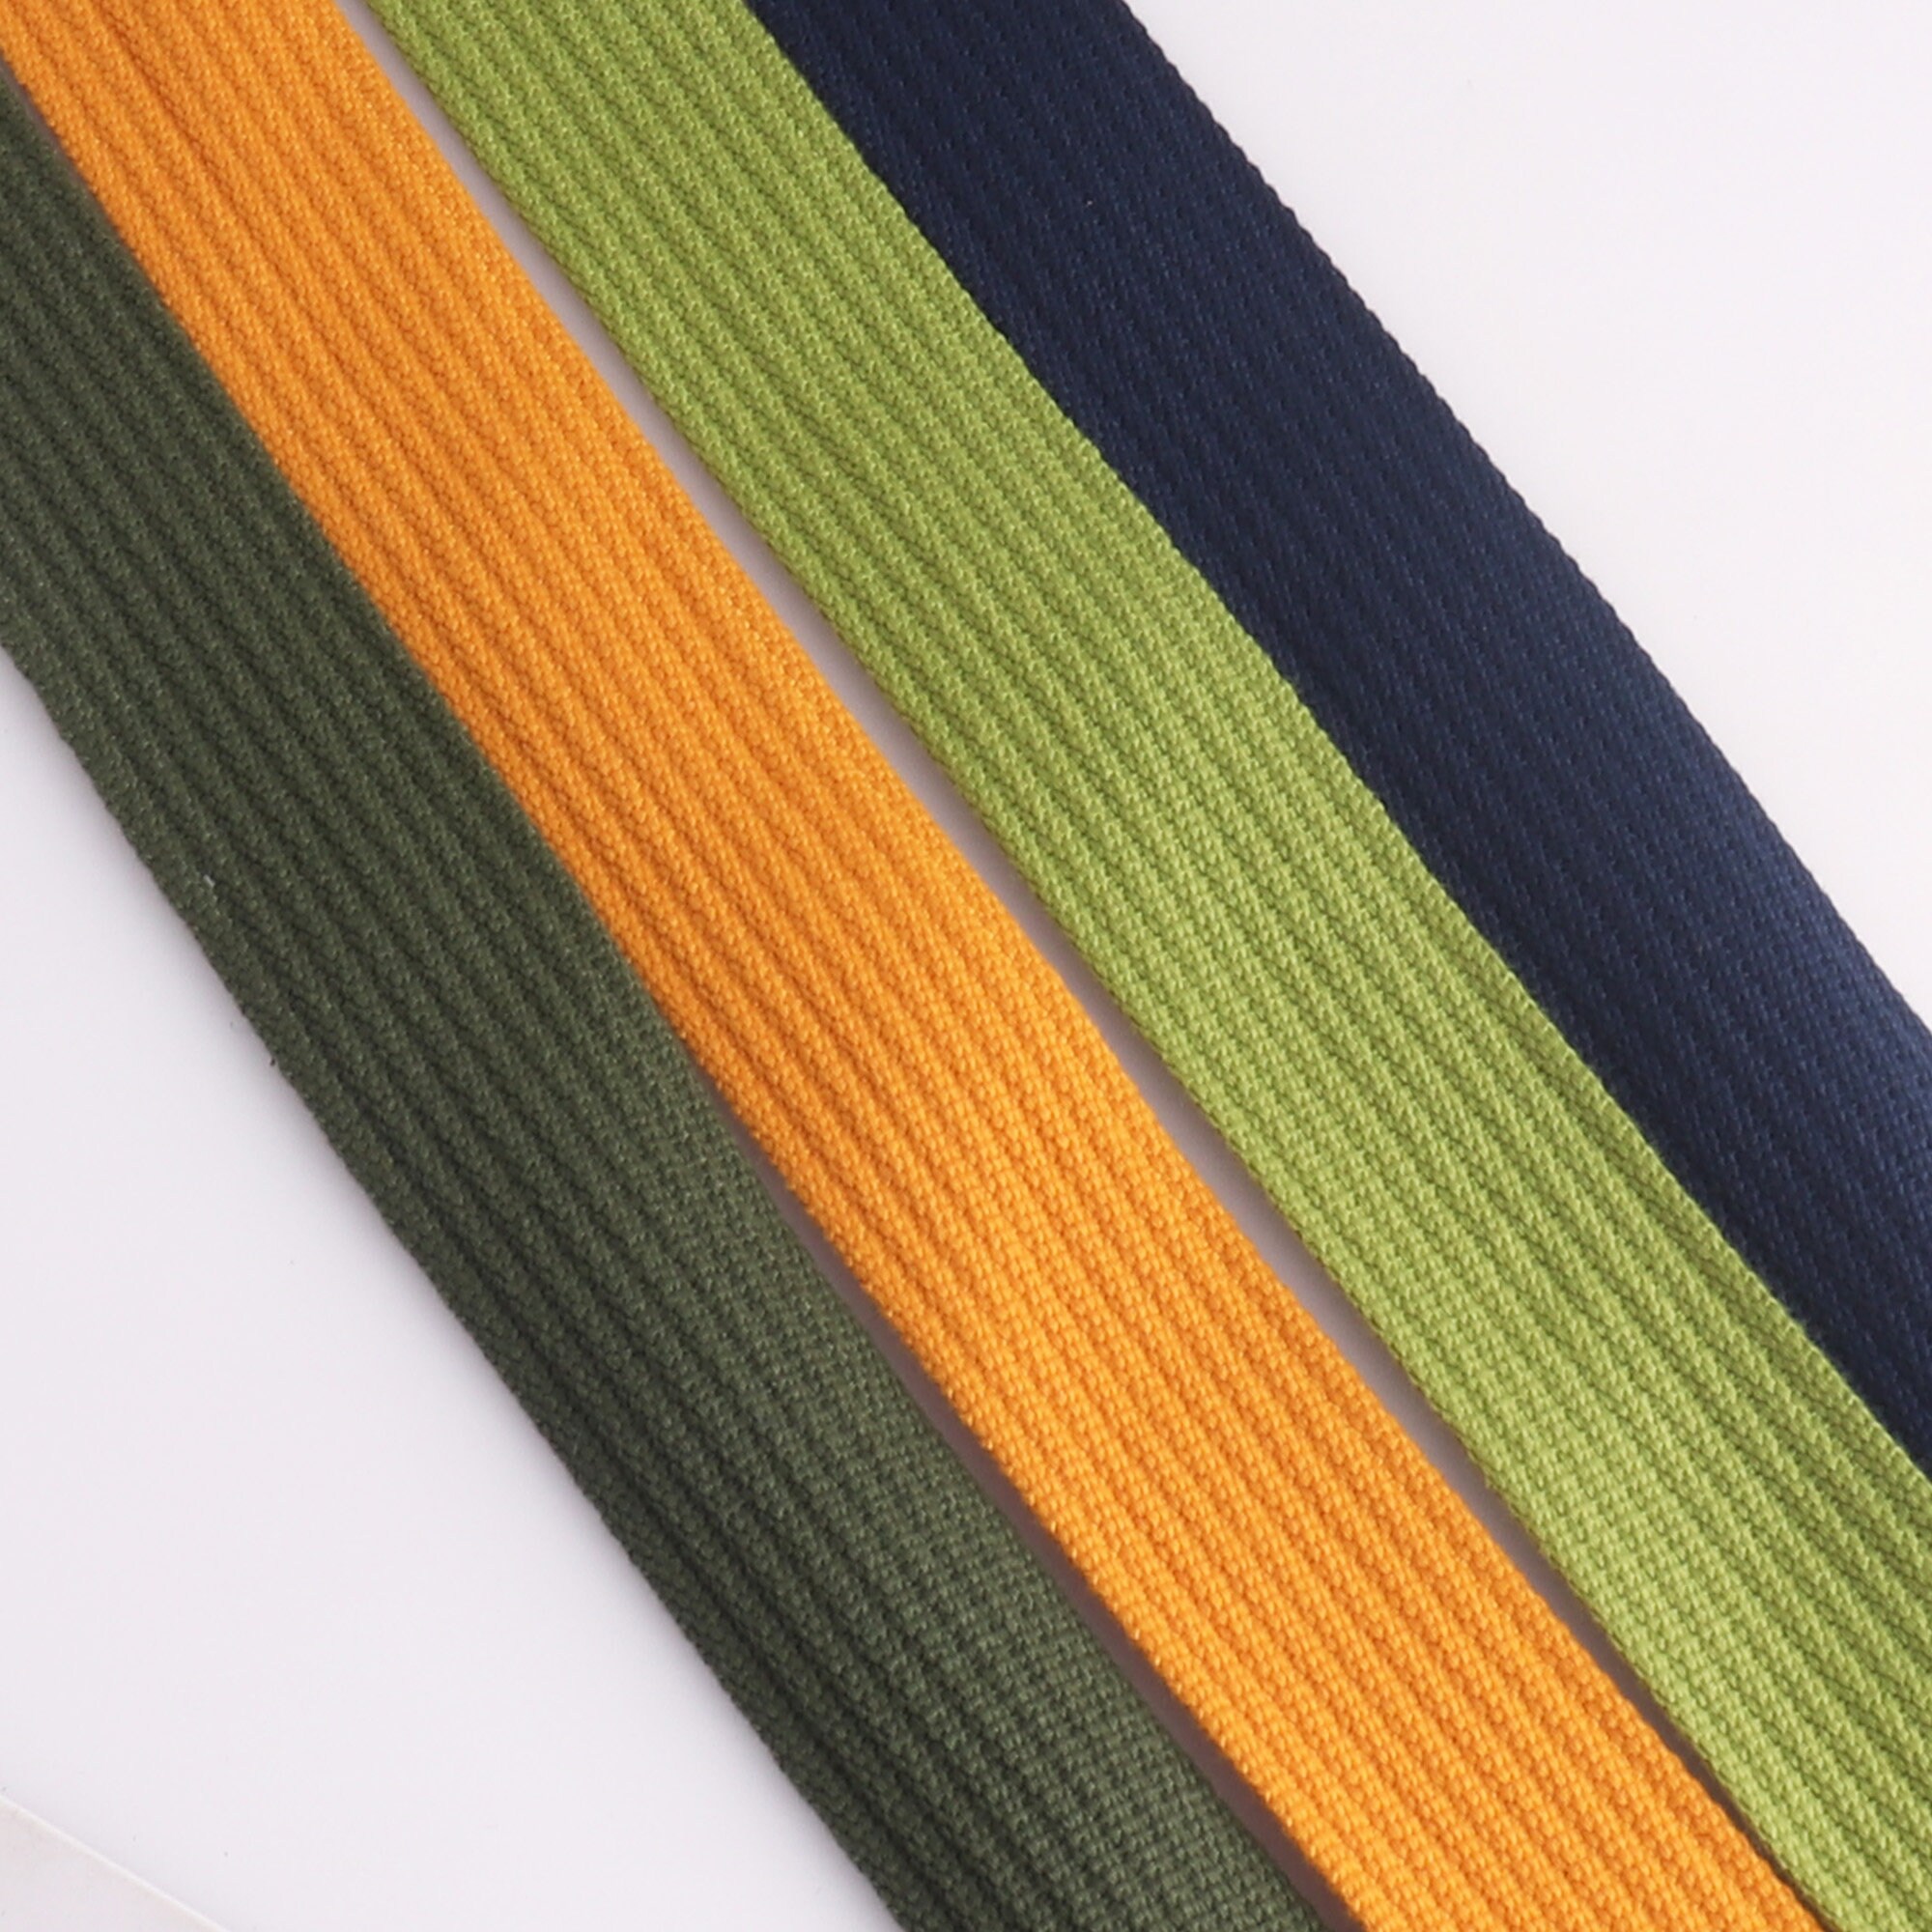 1.5 Inch Cotton Webbing 5 Continuous Yards Many Colors Available Bag  Handles, Bag Strap for Tote Bag Upholstery Webbing 